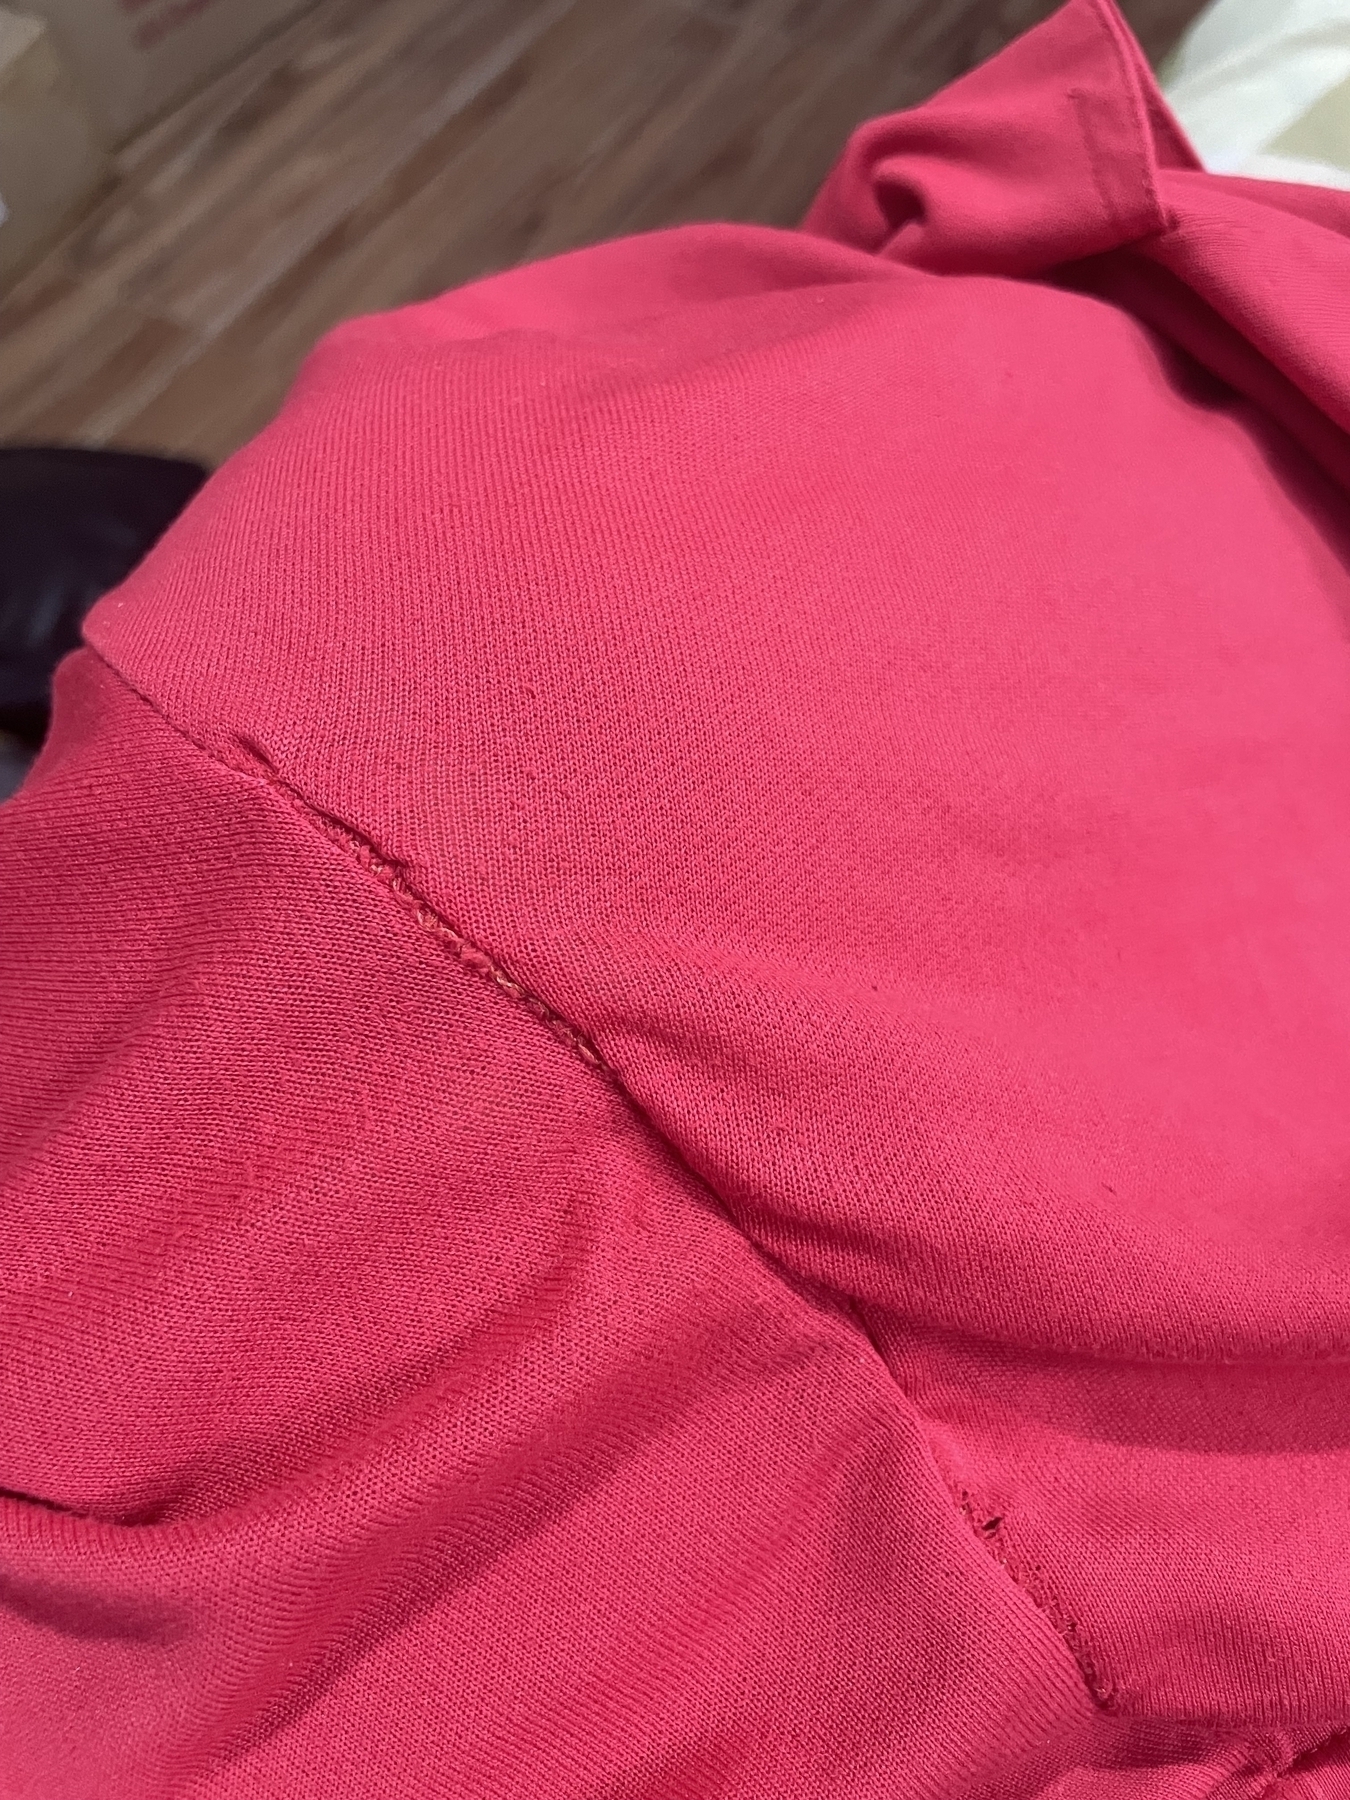 Chi's red shorts that previously had a hole in it, now sewn back closed. Some of the threads used in her patchwork are visible, and the sewing isn't that clean, but the hole is not present anymore.